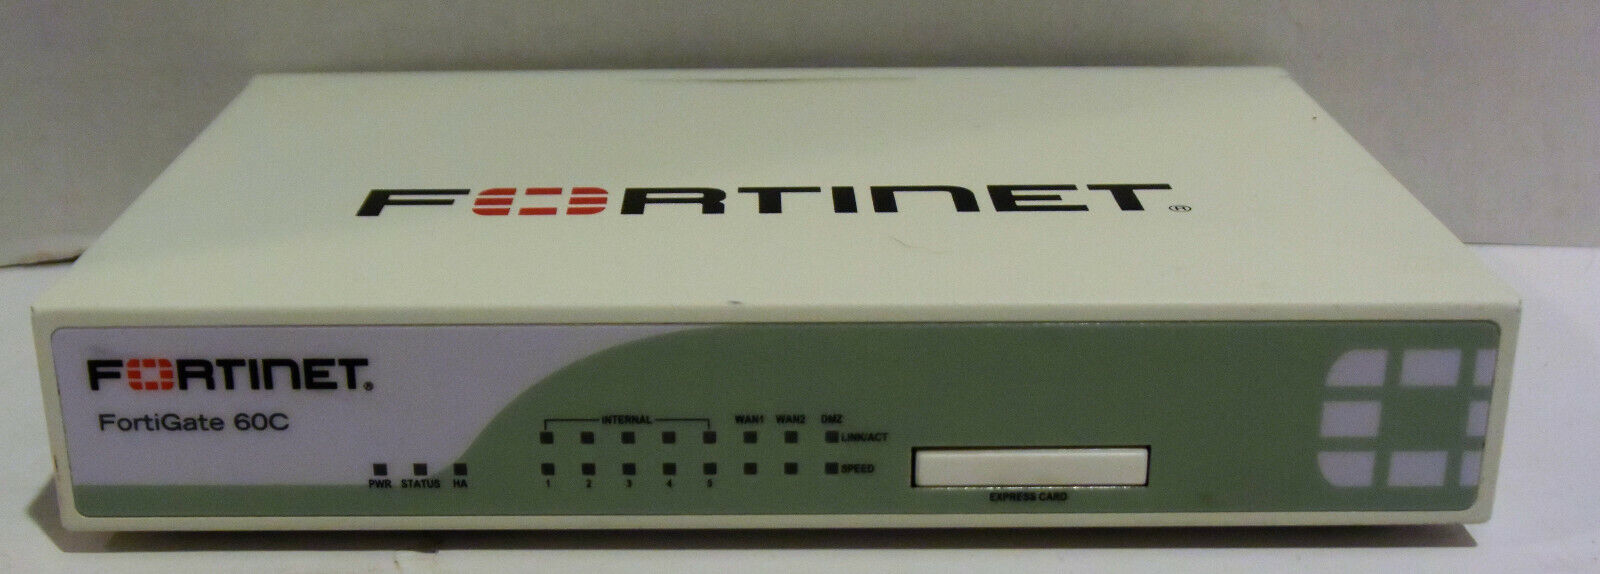 Fortinet FG-60C Fortigate-60C 8-Port Gigabit Firewall Security Appliance AS IS